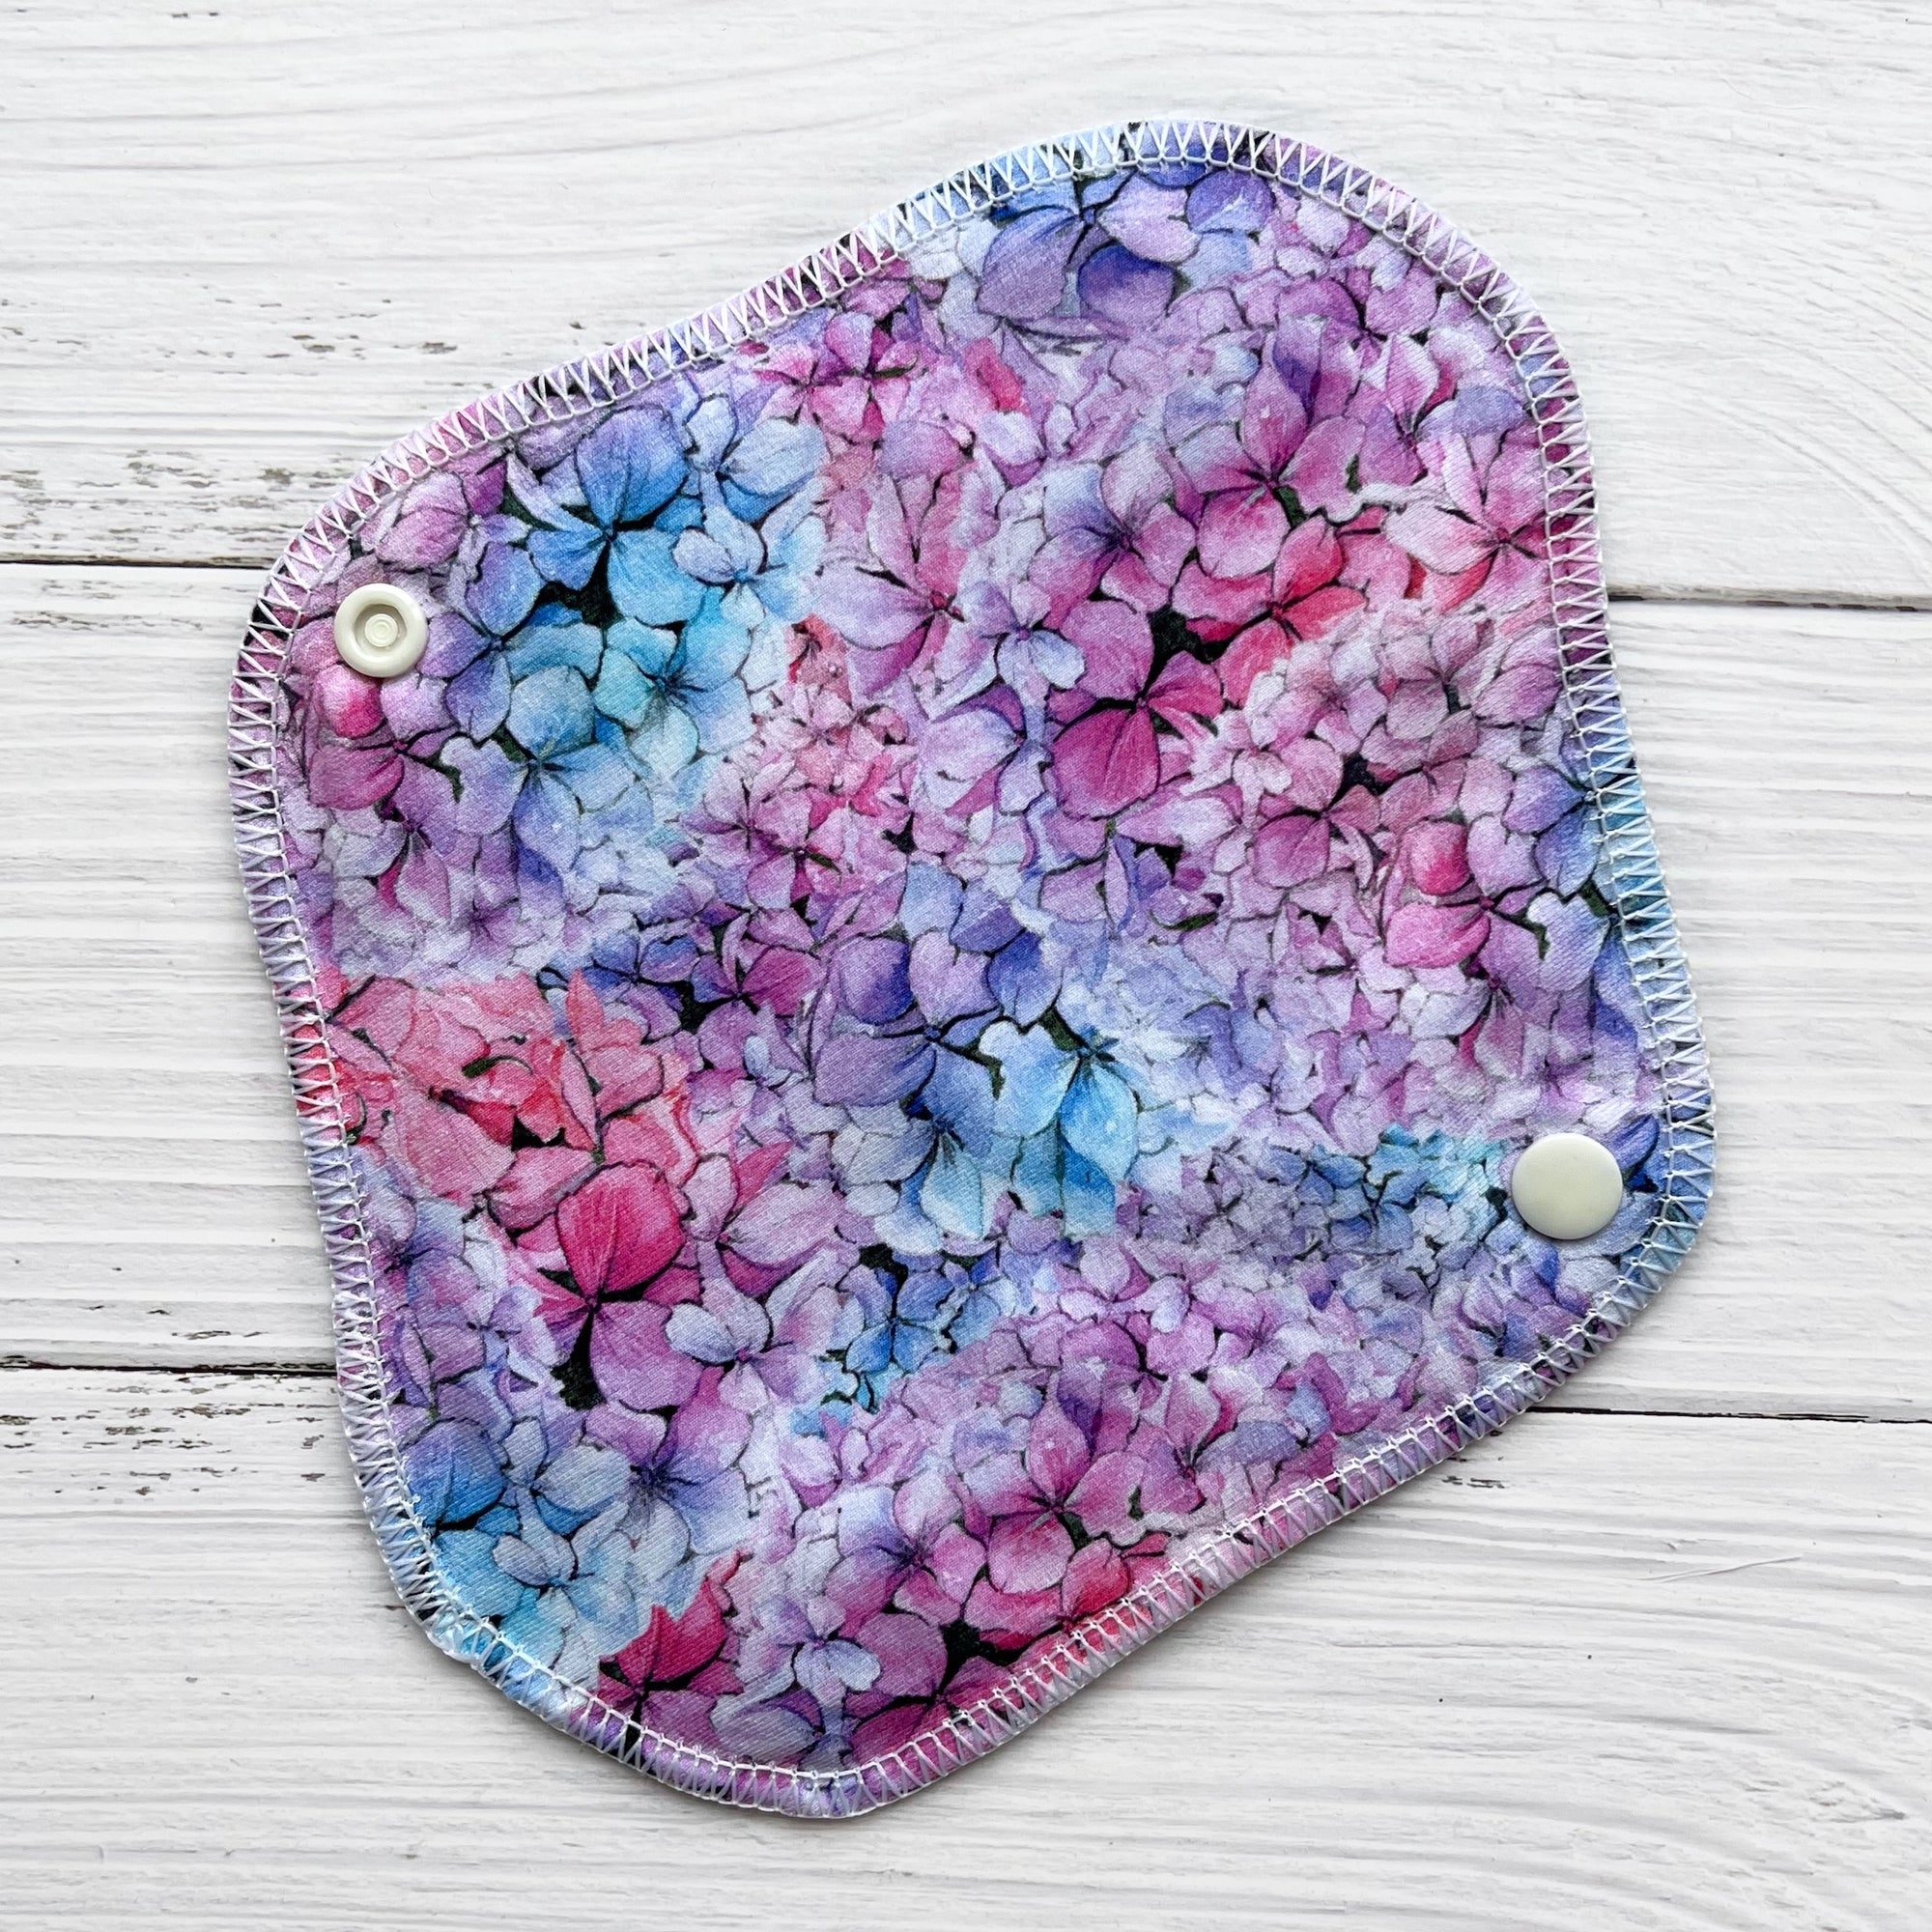 reusable pantyliner in a pink blue and purple hydrangea print